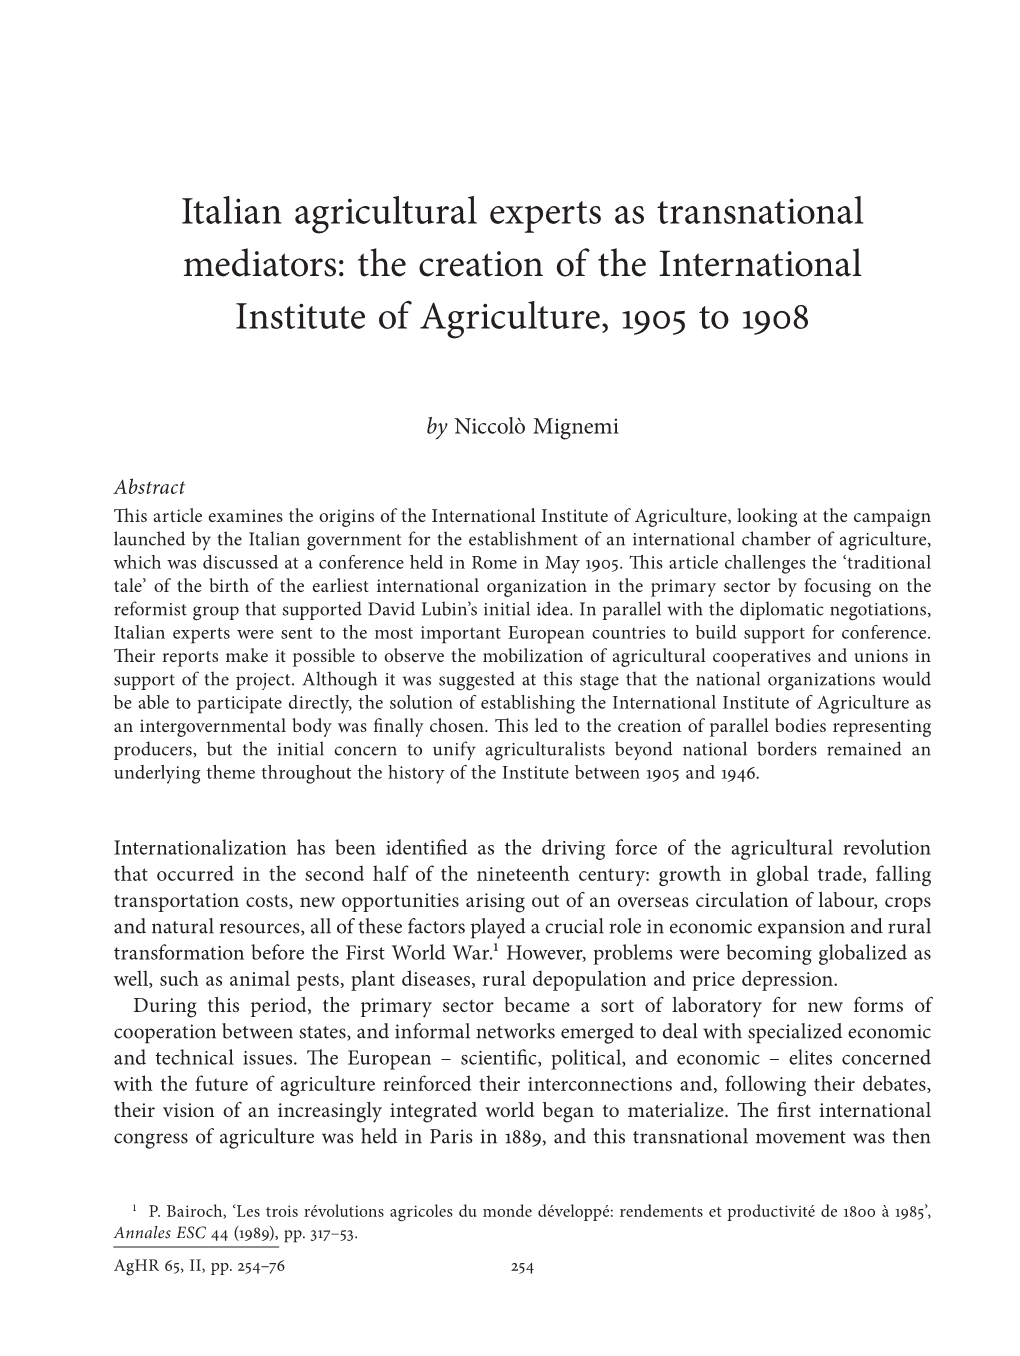 Italian Agricultural Experts As Transnational Mediators: the Creation of the International Institute of Agriculture, 1905 to 1908